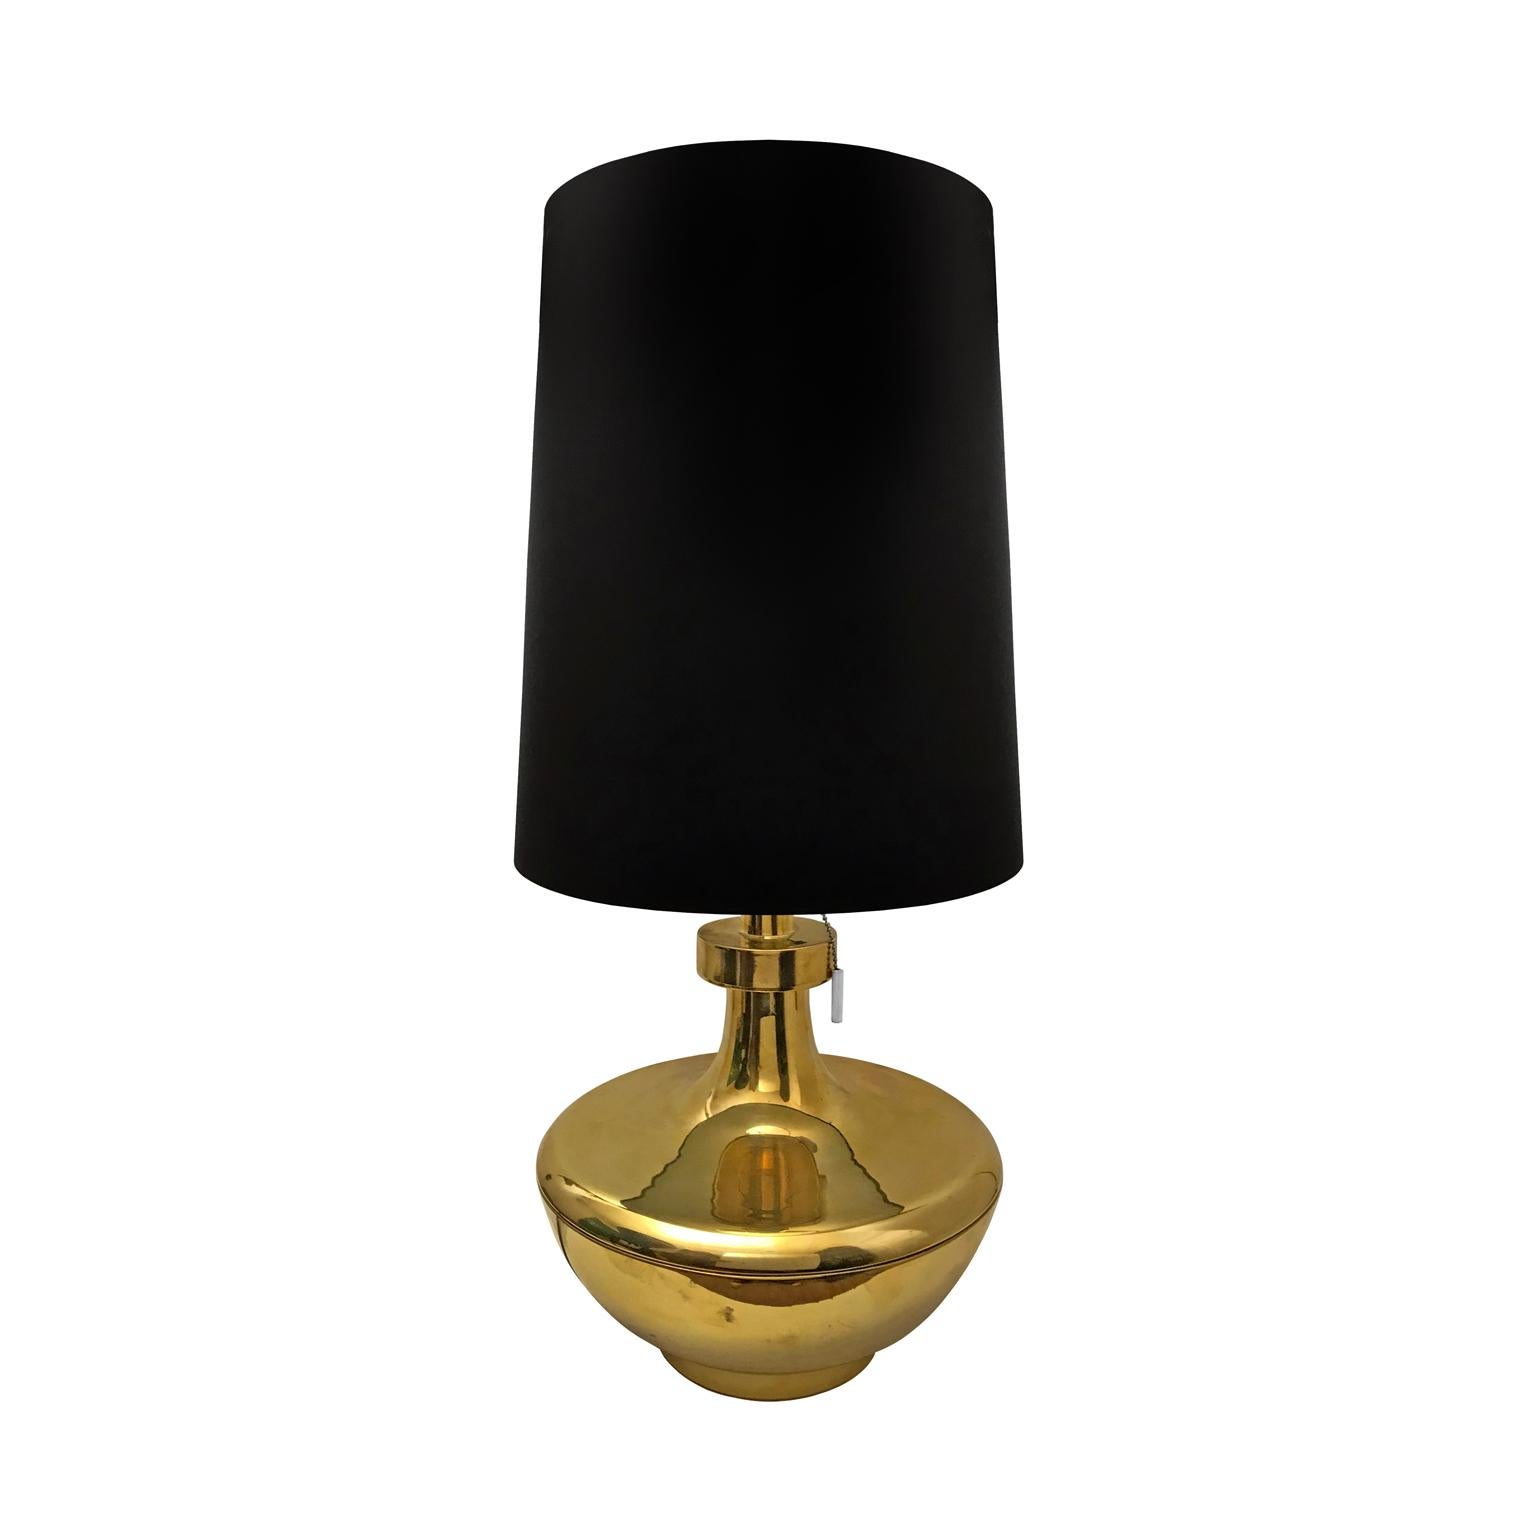 1970s Spanish Polished Brass Jar Lamp with Tall Black Drum Shade